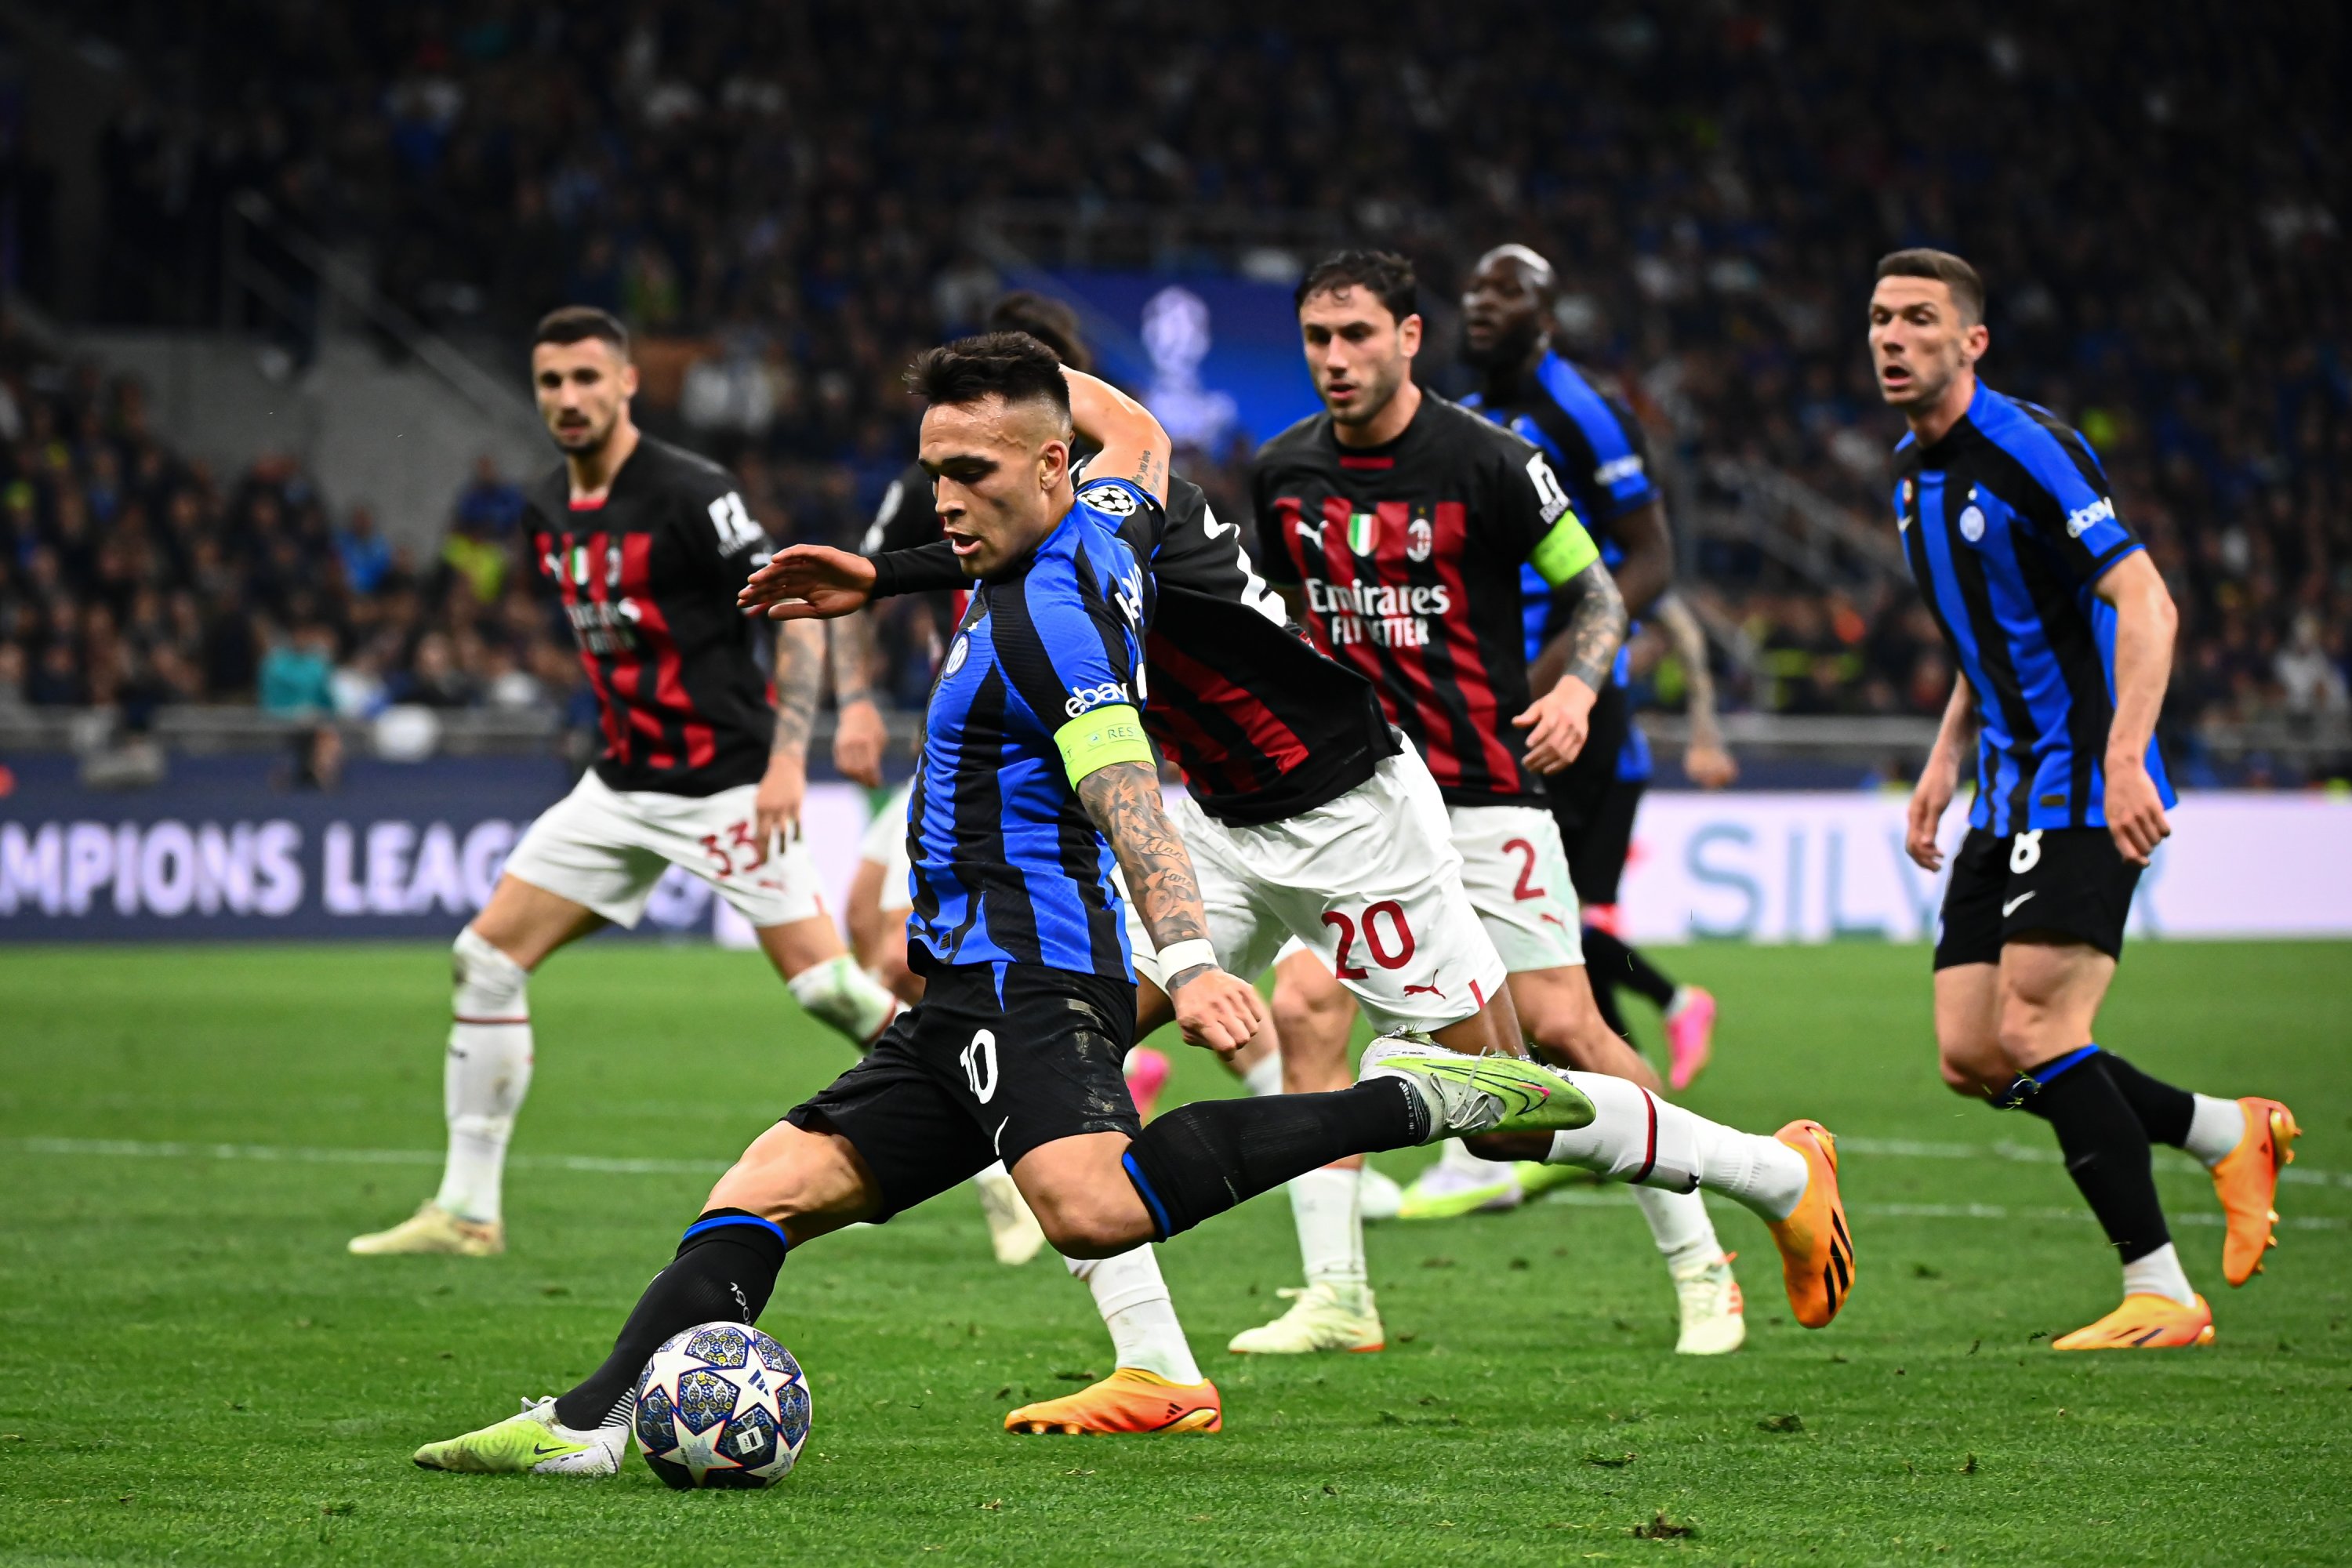 Inter Milan raises hope and ambition in Champions League loss, but